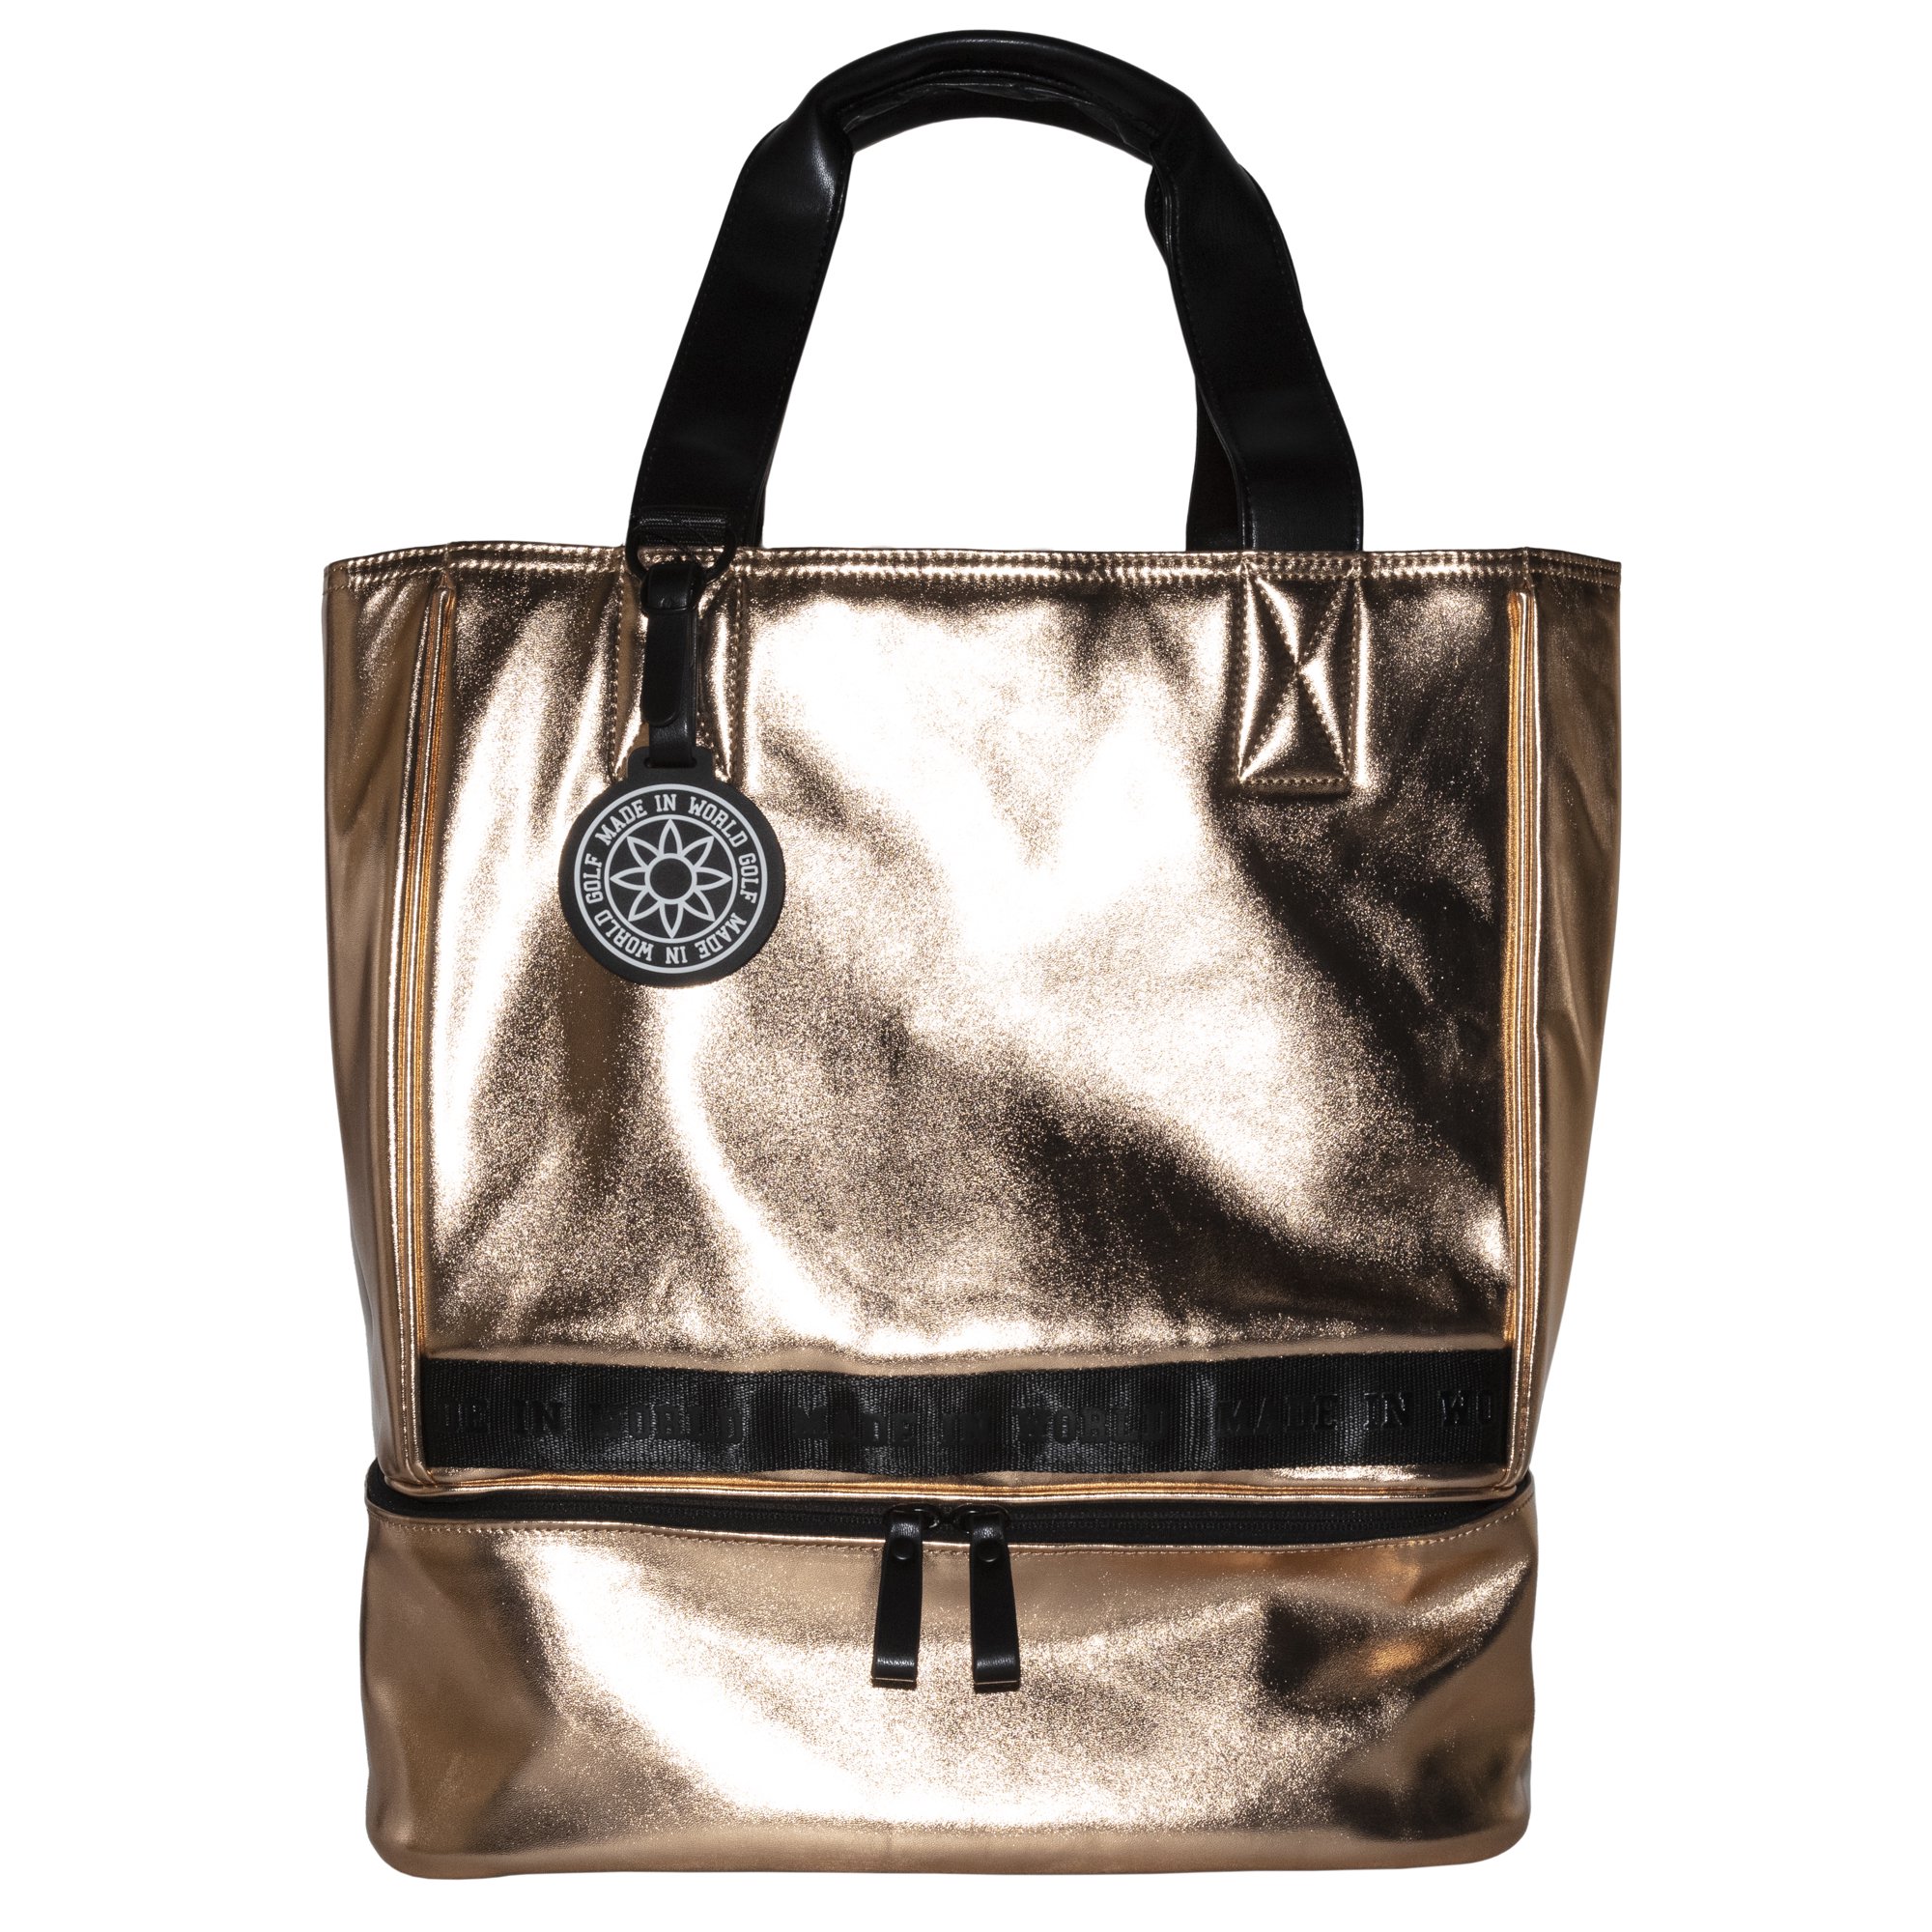 <img class='new_mark_img1' src='https://img.shop-pro.jp/img/new/icons14.gif' style='border:none;display:inline;margin:0px;padding:0px;width:auto;' />TOTE BAG<br />PINK GOLD